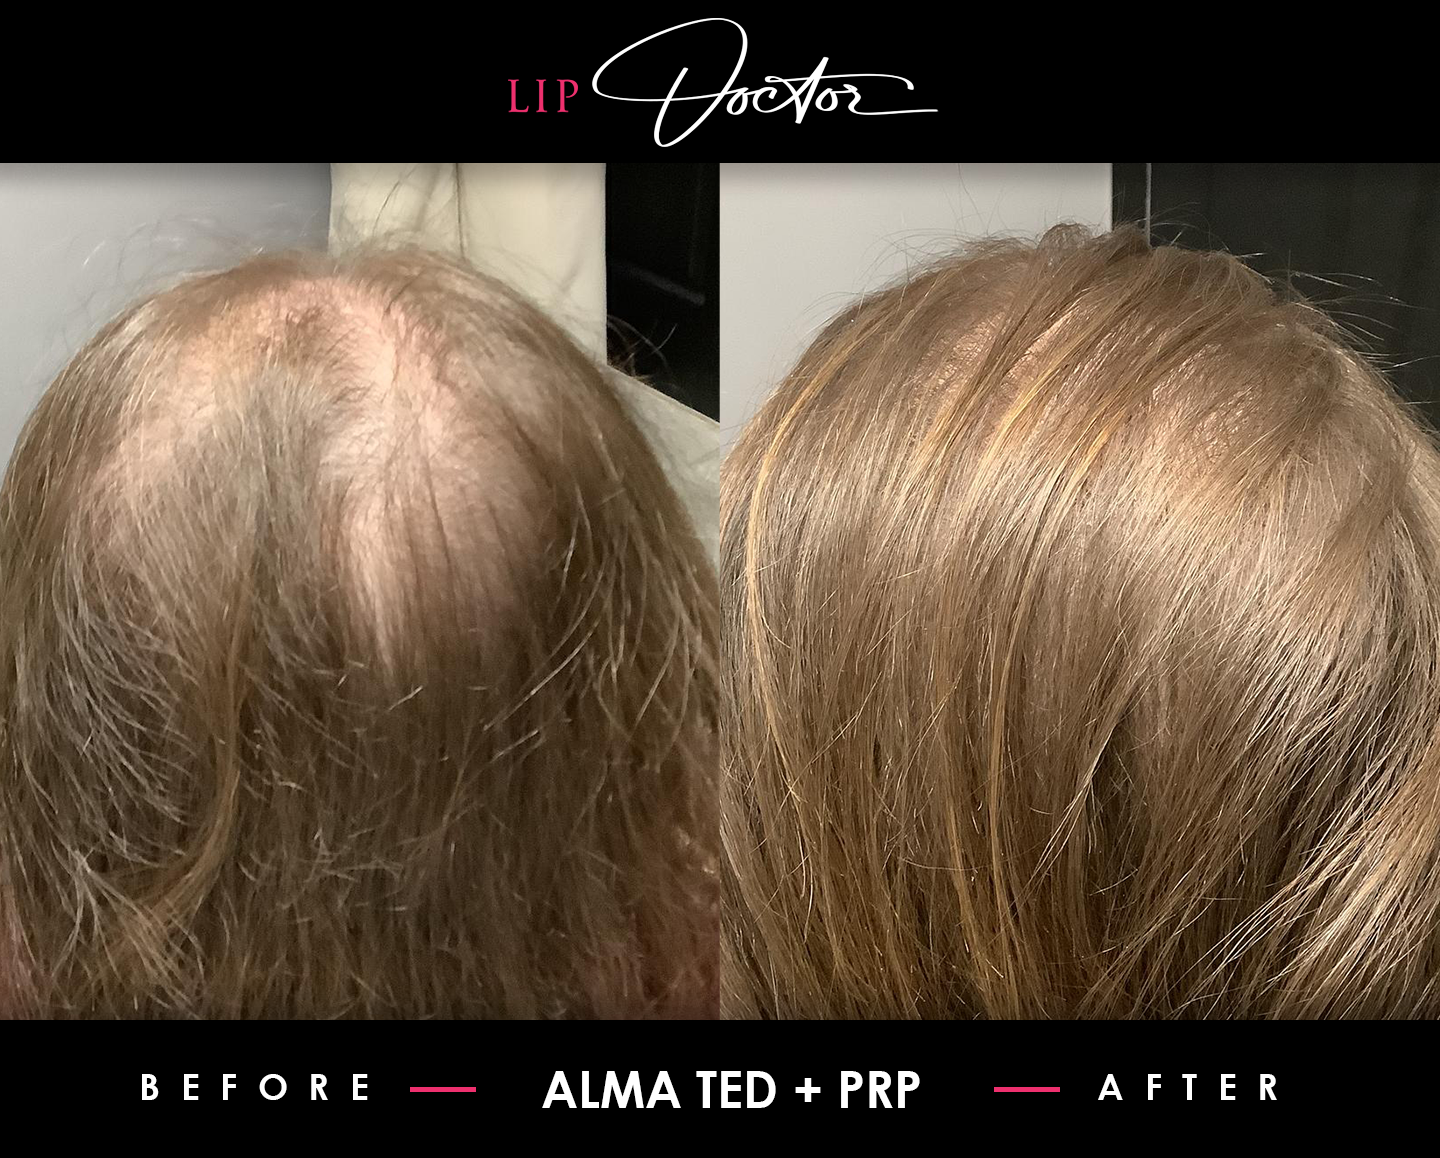 Dramatic improvement in hair density after PRP treatment at The Lip Doctor, visible in before and after images.